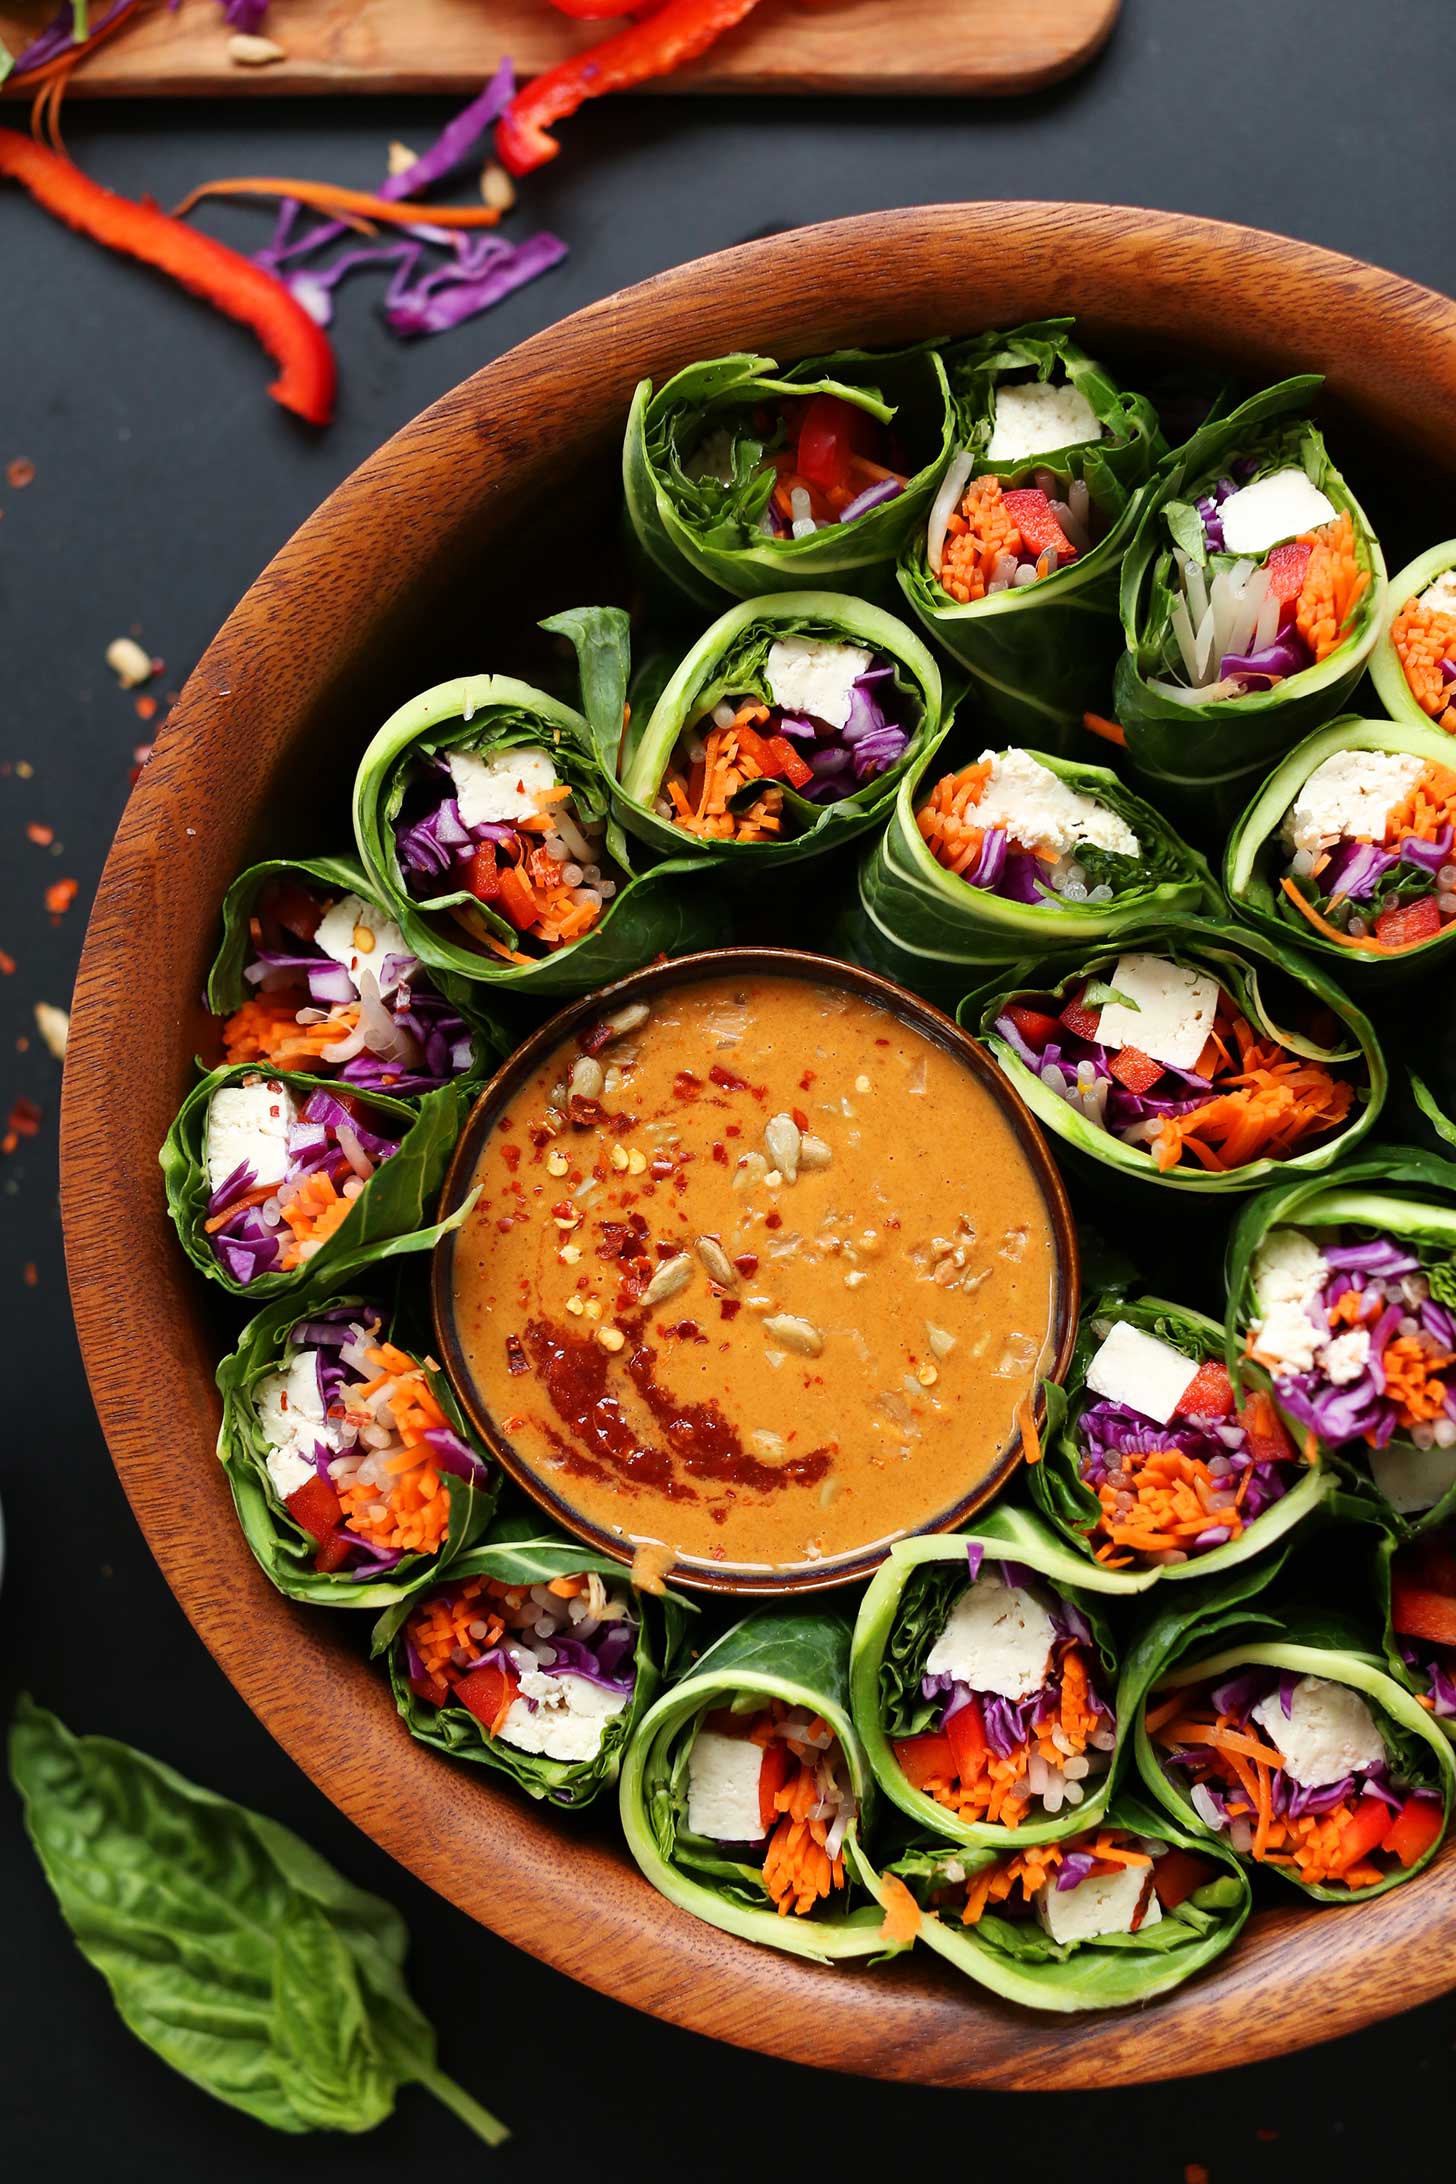 Healthy, hearty vegan spring rolls with sunflower butter dipping sauce